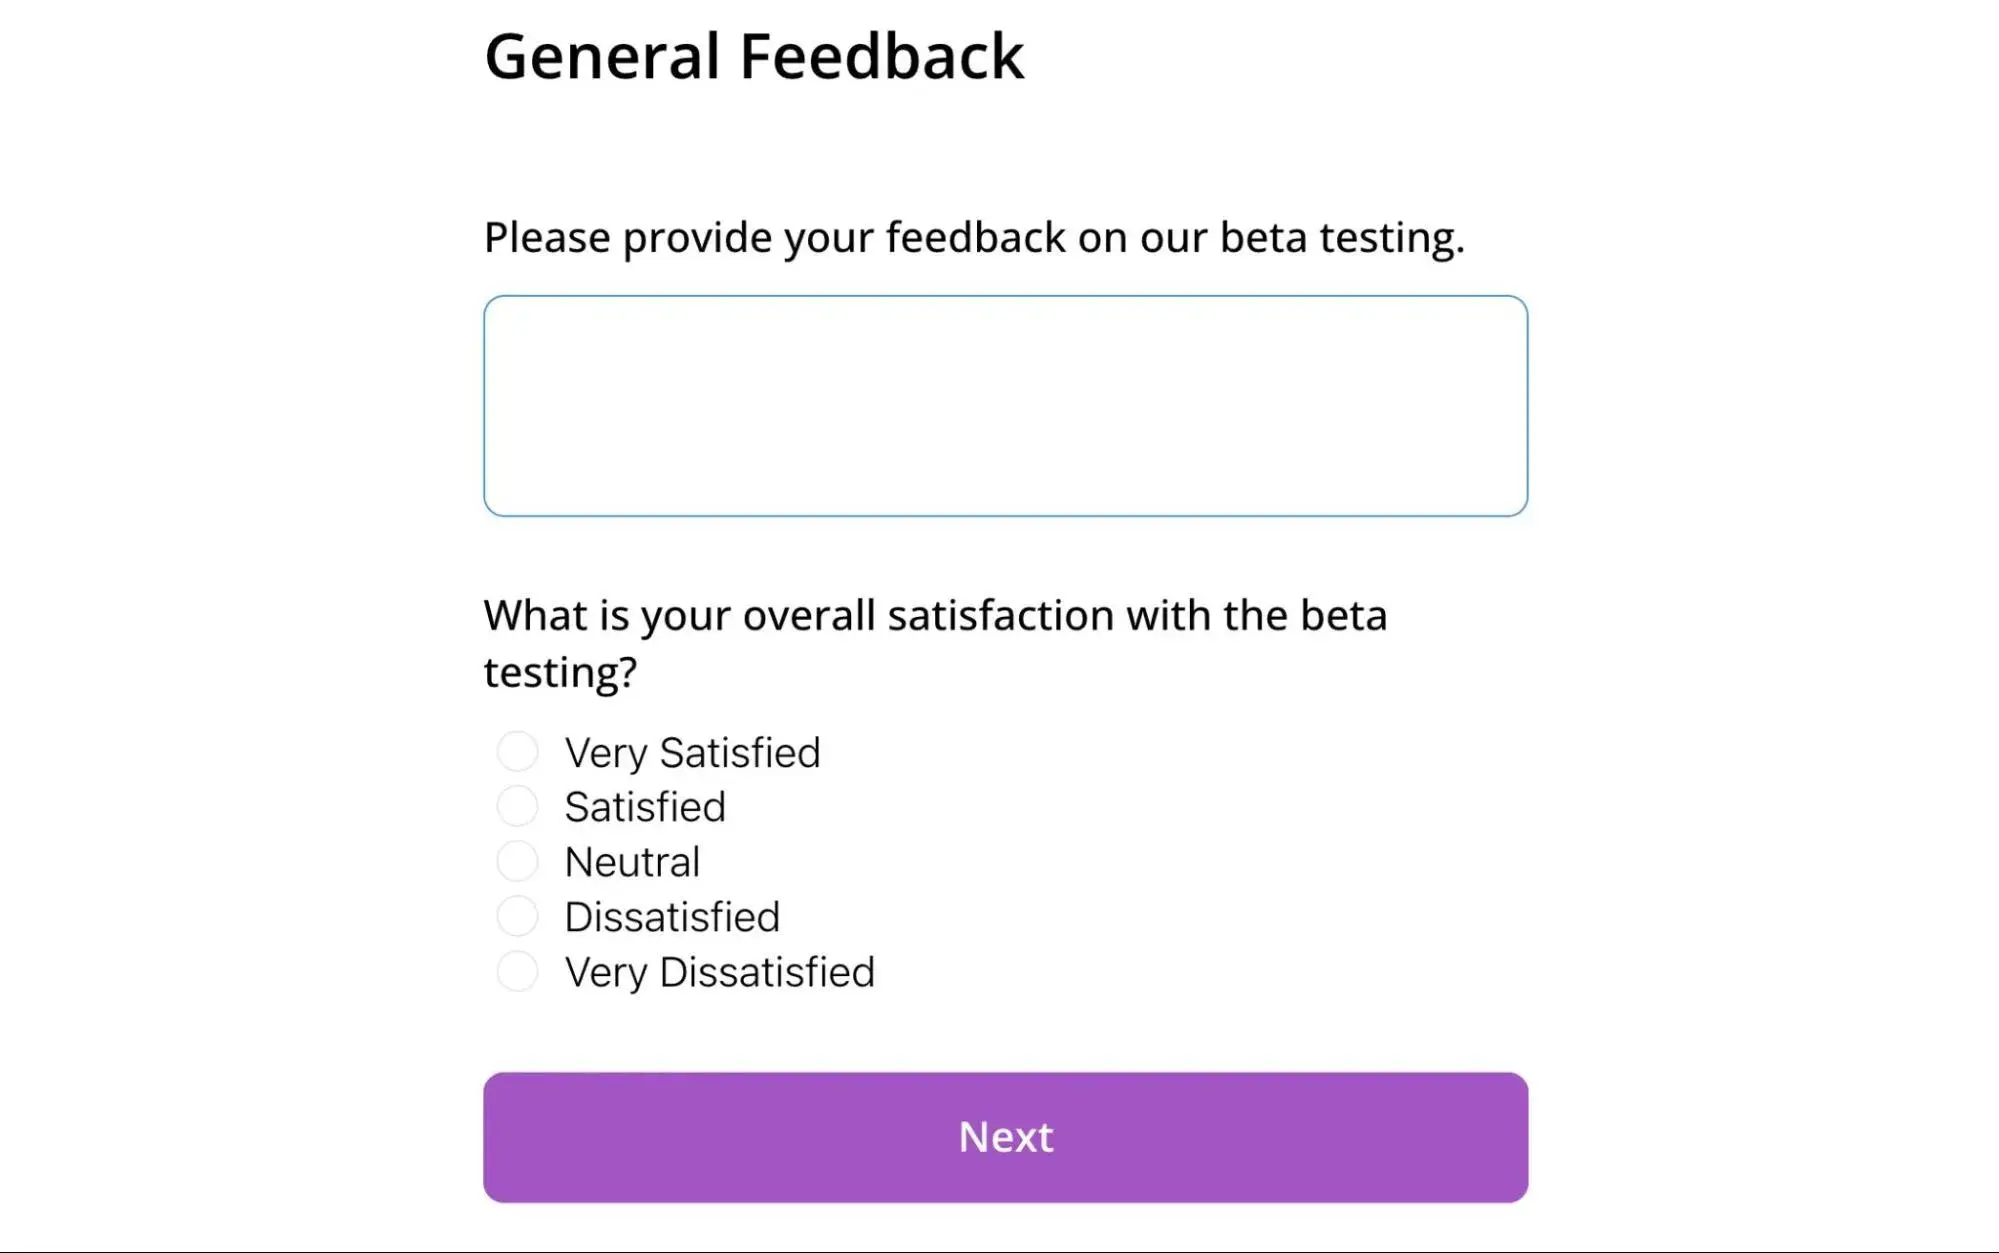 A basic feedback template from Feathery